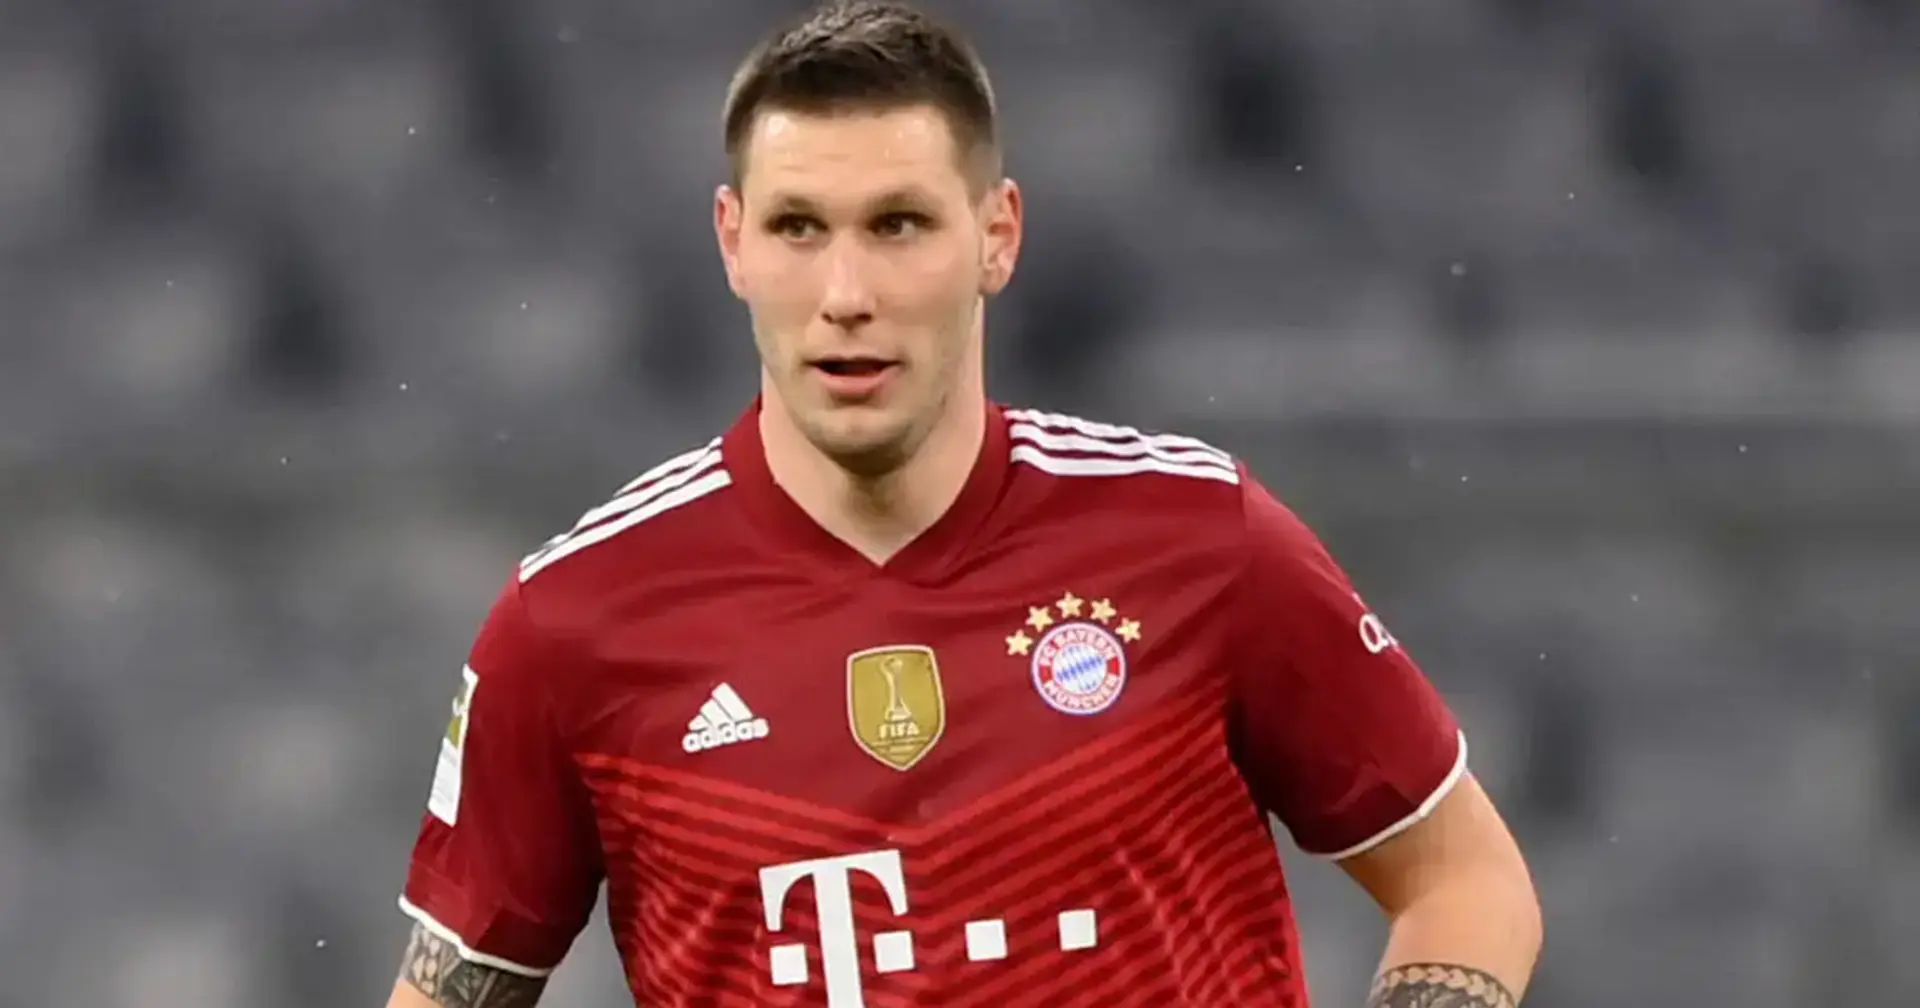 Barca interested in signing Bayern defender Sule as free agent (reliability: 4 stars)